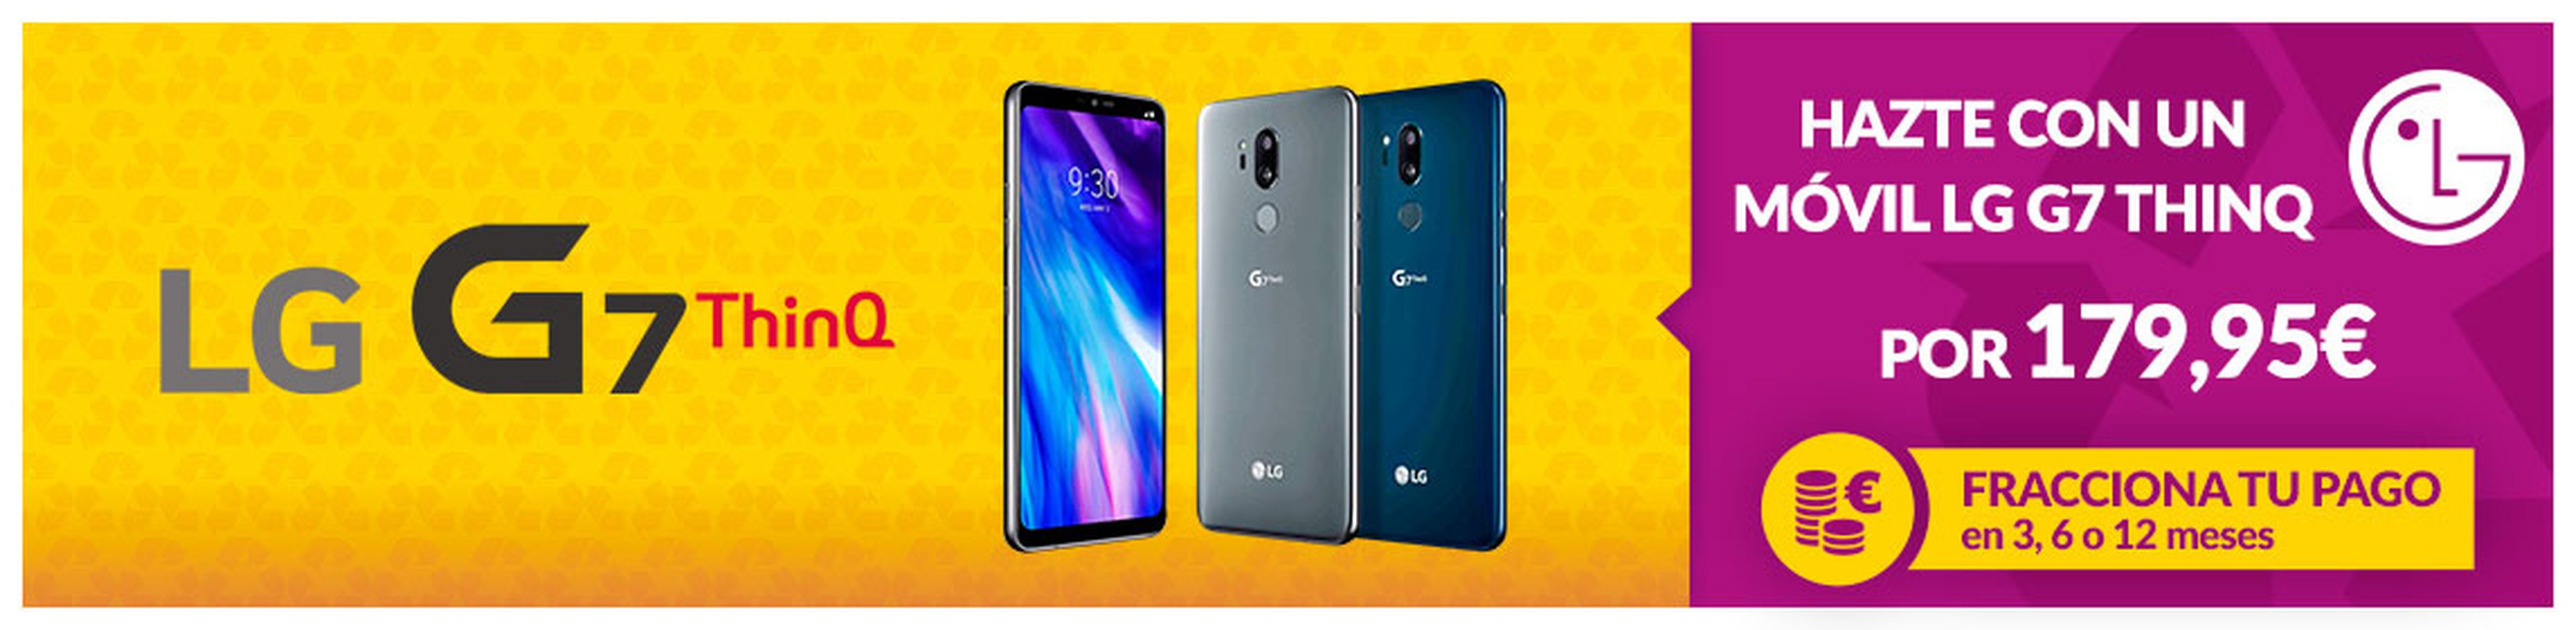 GAME PROMO MOVILES LG